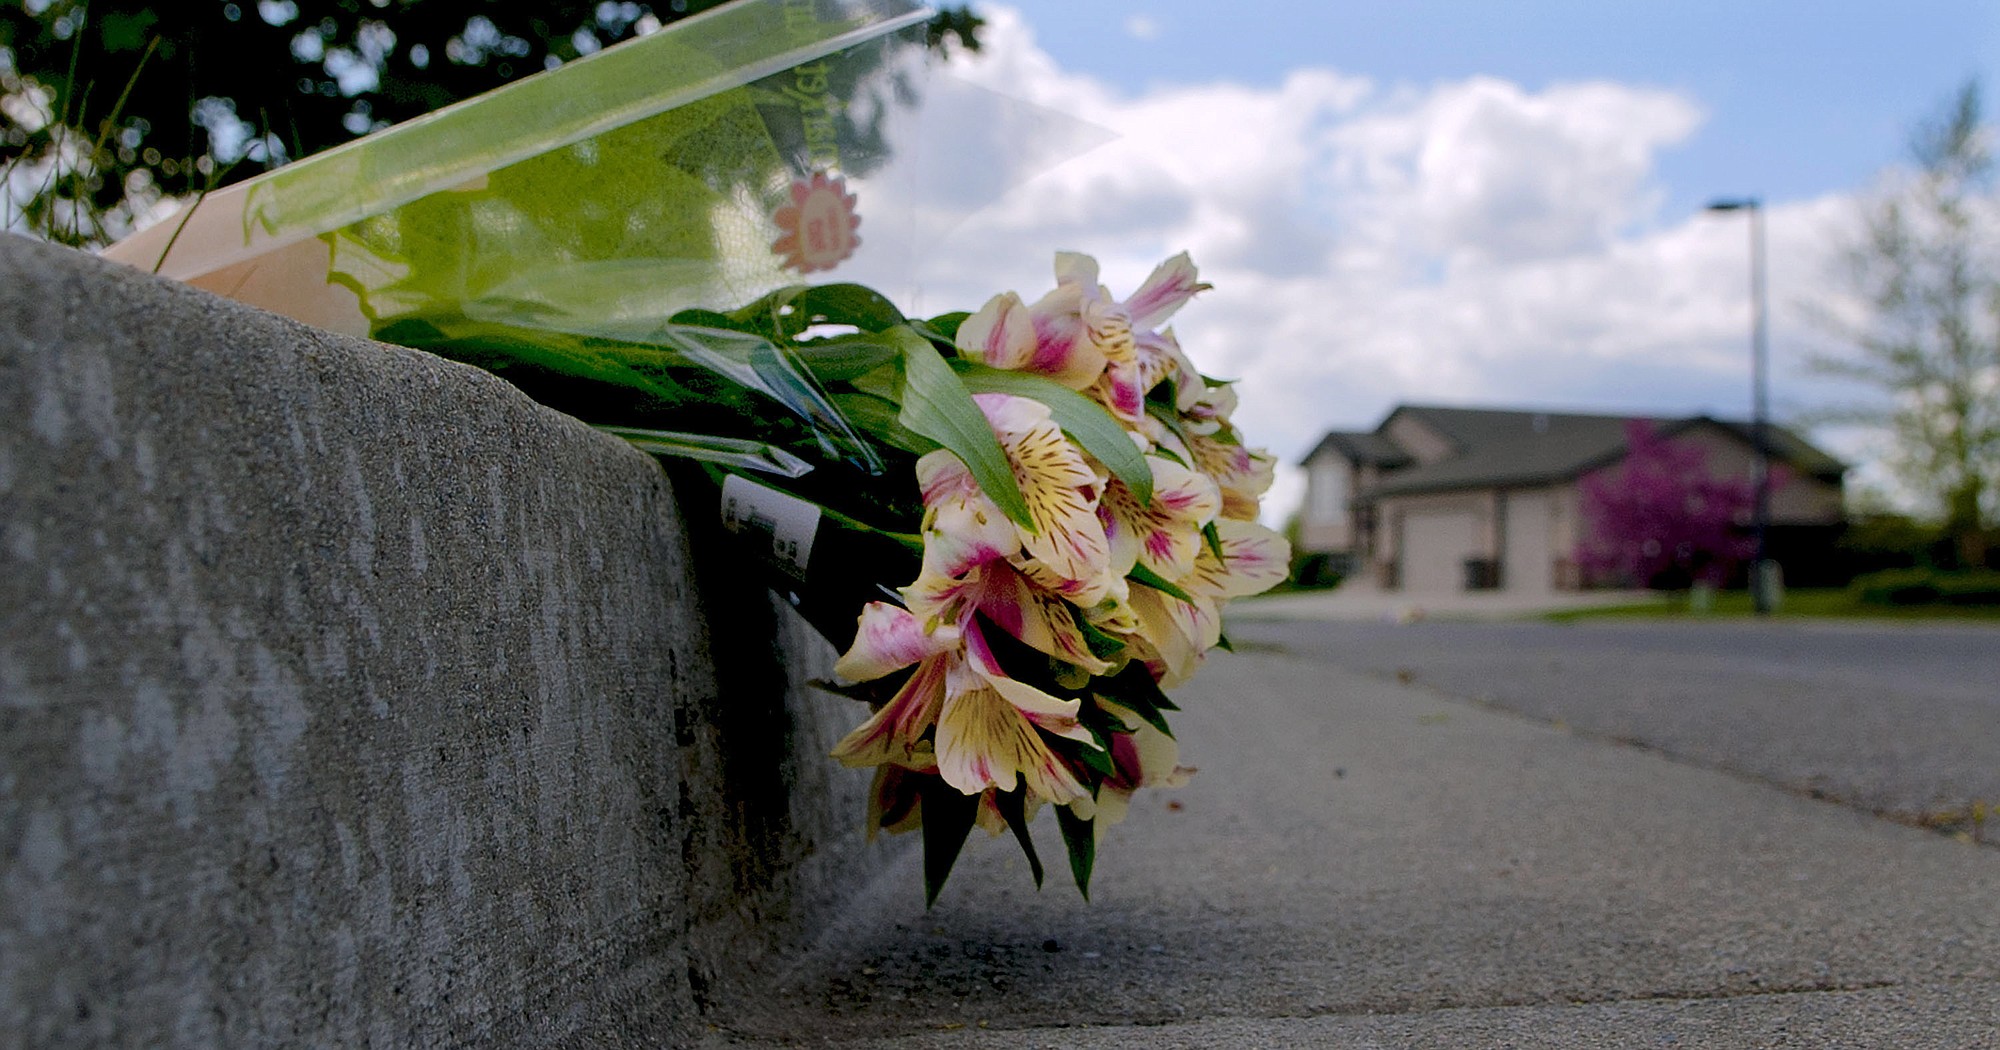 Flowers lie on the 2800 block of West Wilbur Avenue in Coeur d'Alene, Idaho on Tuesday after a police officer was shot  while on duty. Police Sgt. Greg Moore was shot Tuesday morning after checking on a suspicious individual.